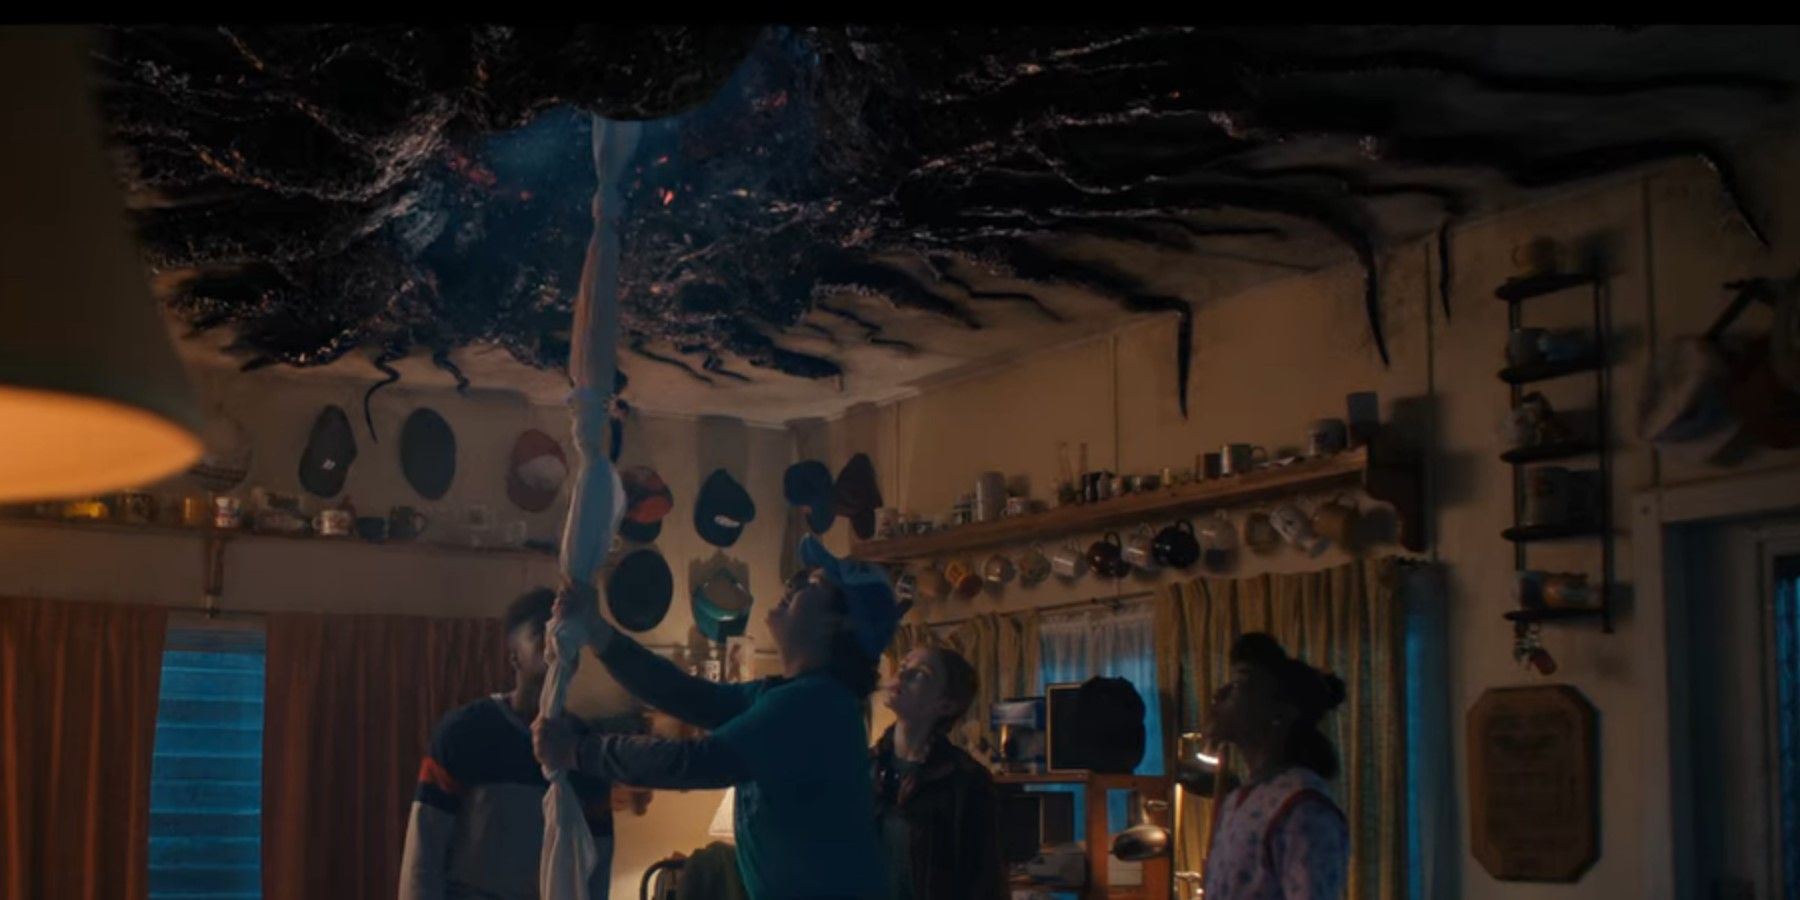 Gate to the Upside Down in Stranger Things season 4.